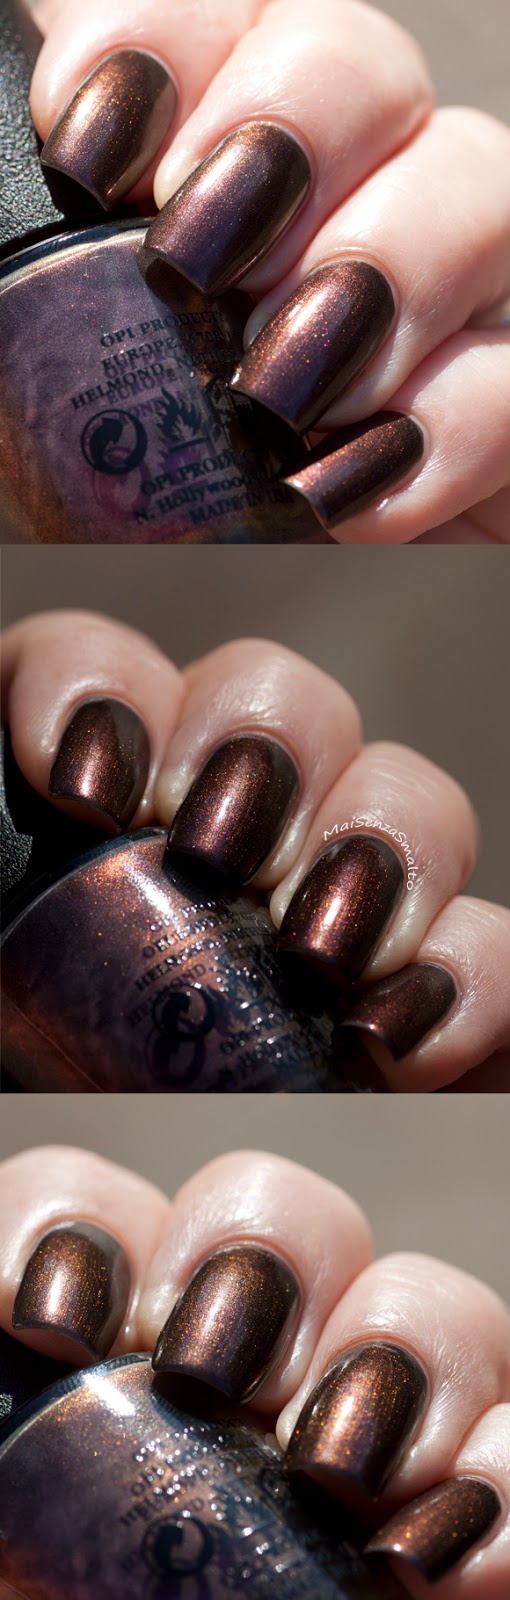 OPI Muir Muir on the wall color shift (3 pics)